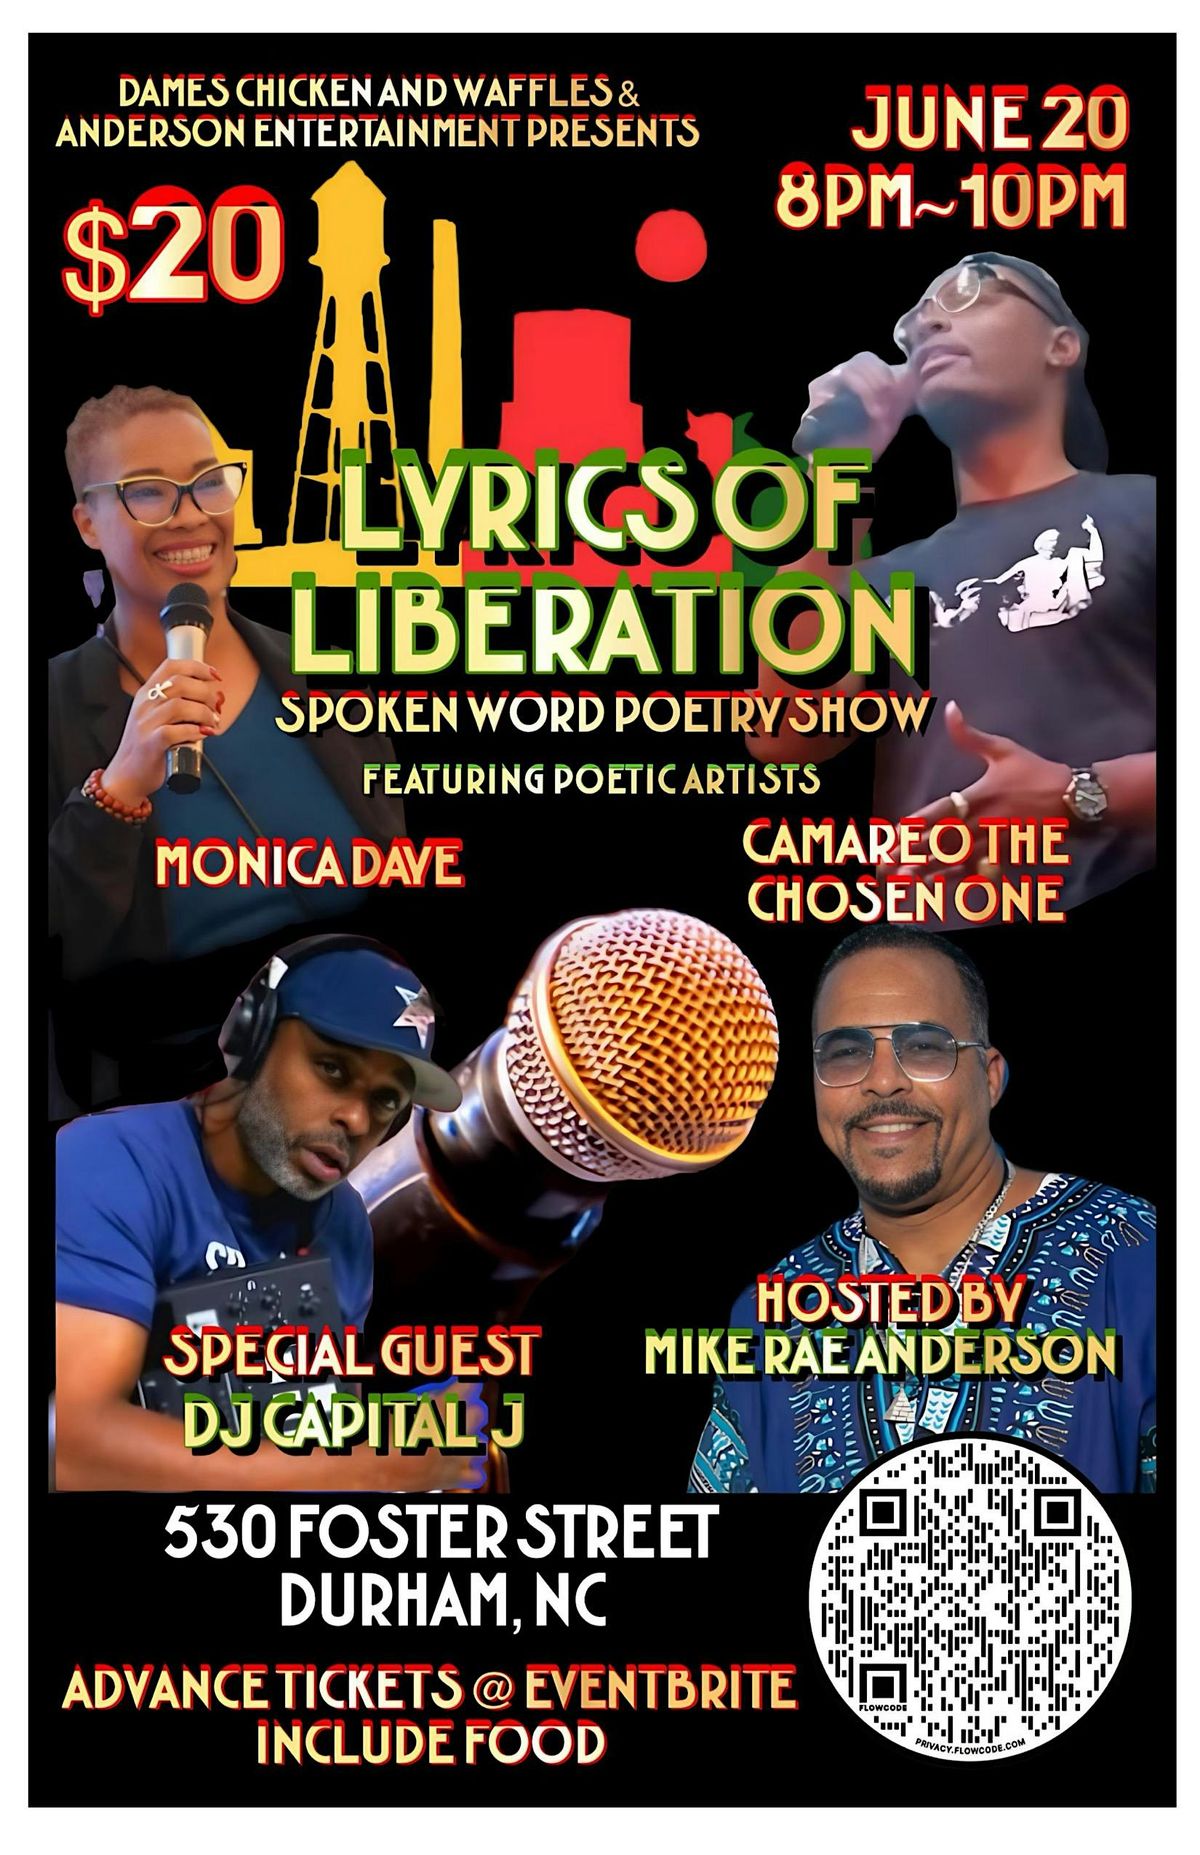 Lyrics of Liberation (A Poetic Juneteenth Tribute) and Open Mic